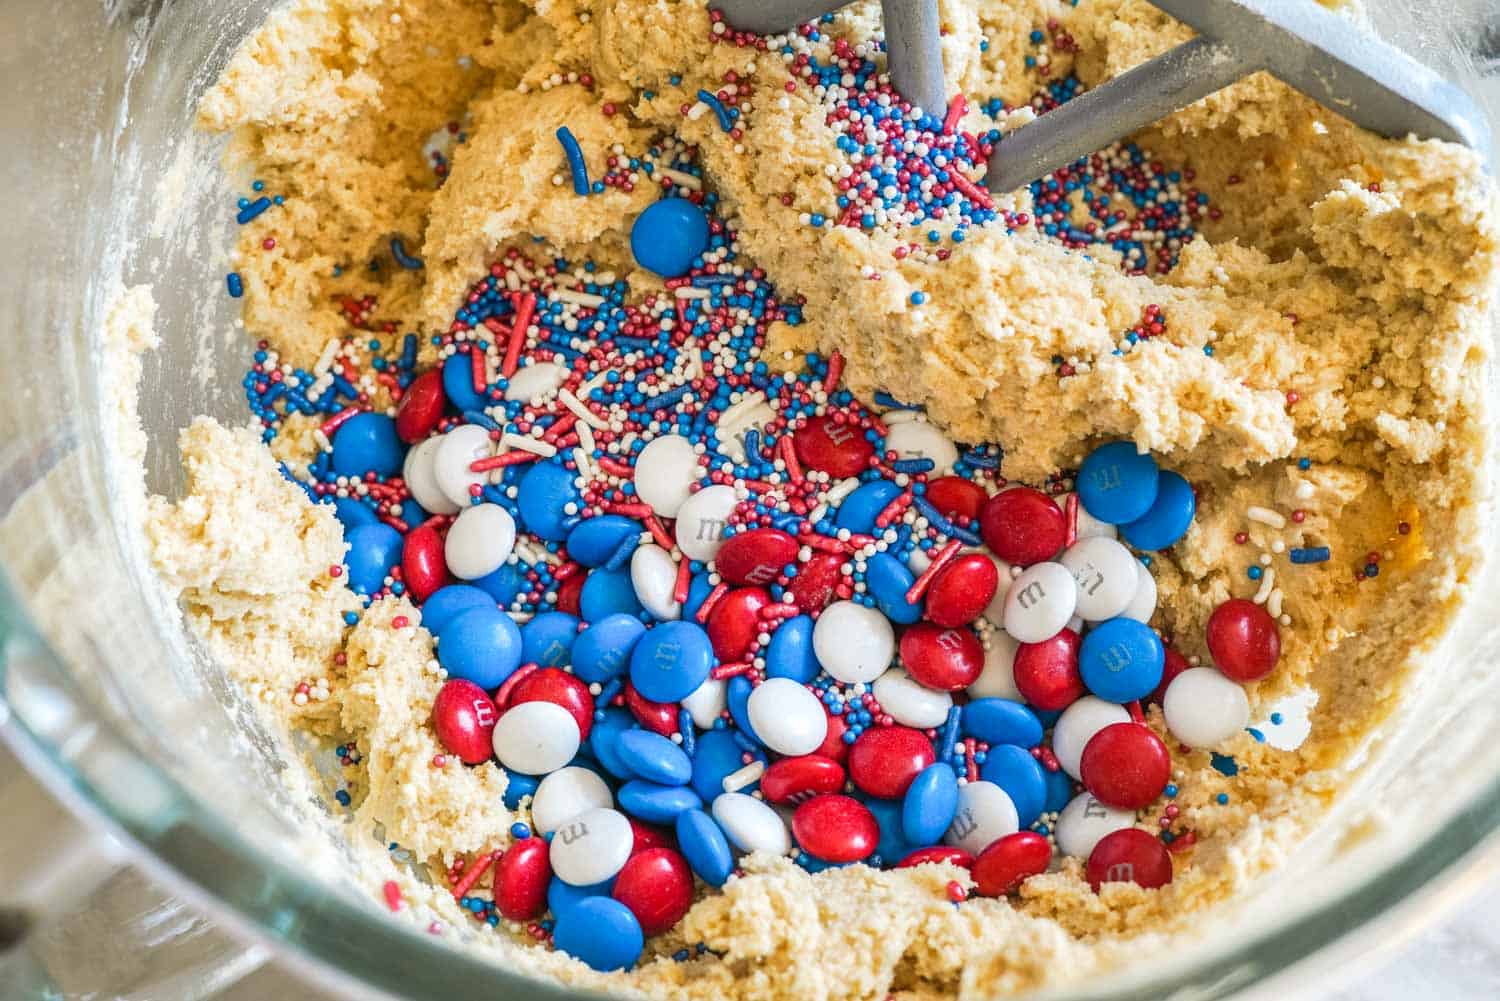 Cookie dough with red white and blue M&M's and sprinkles